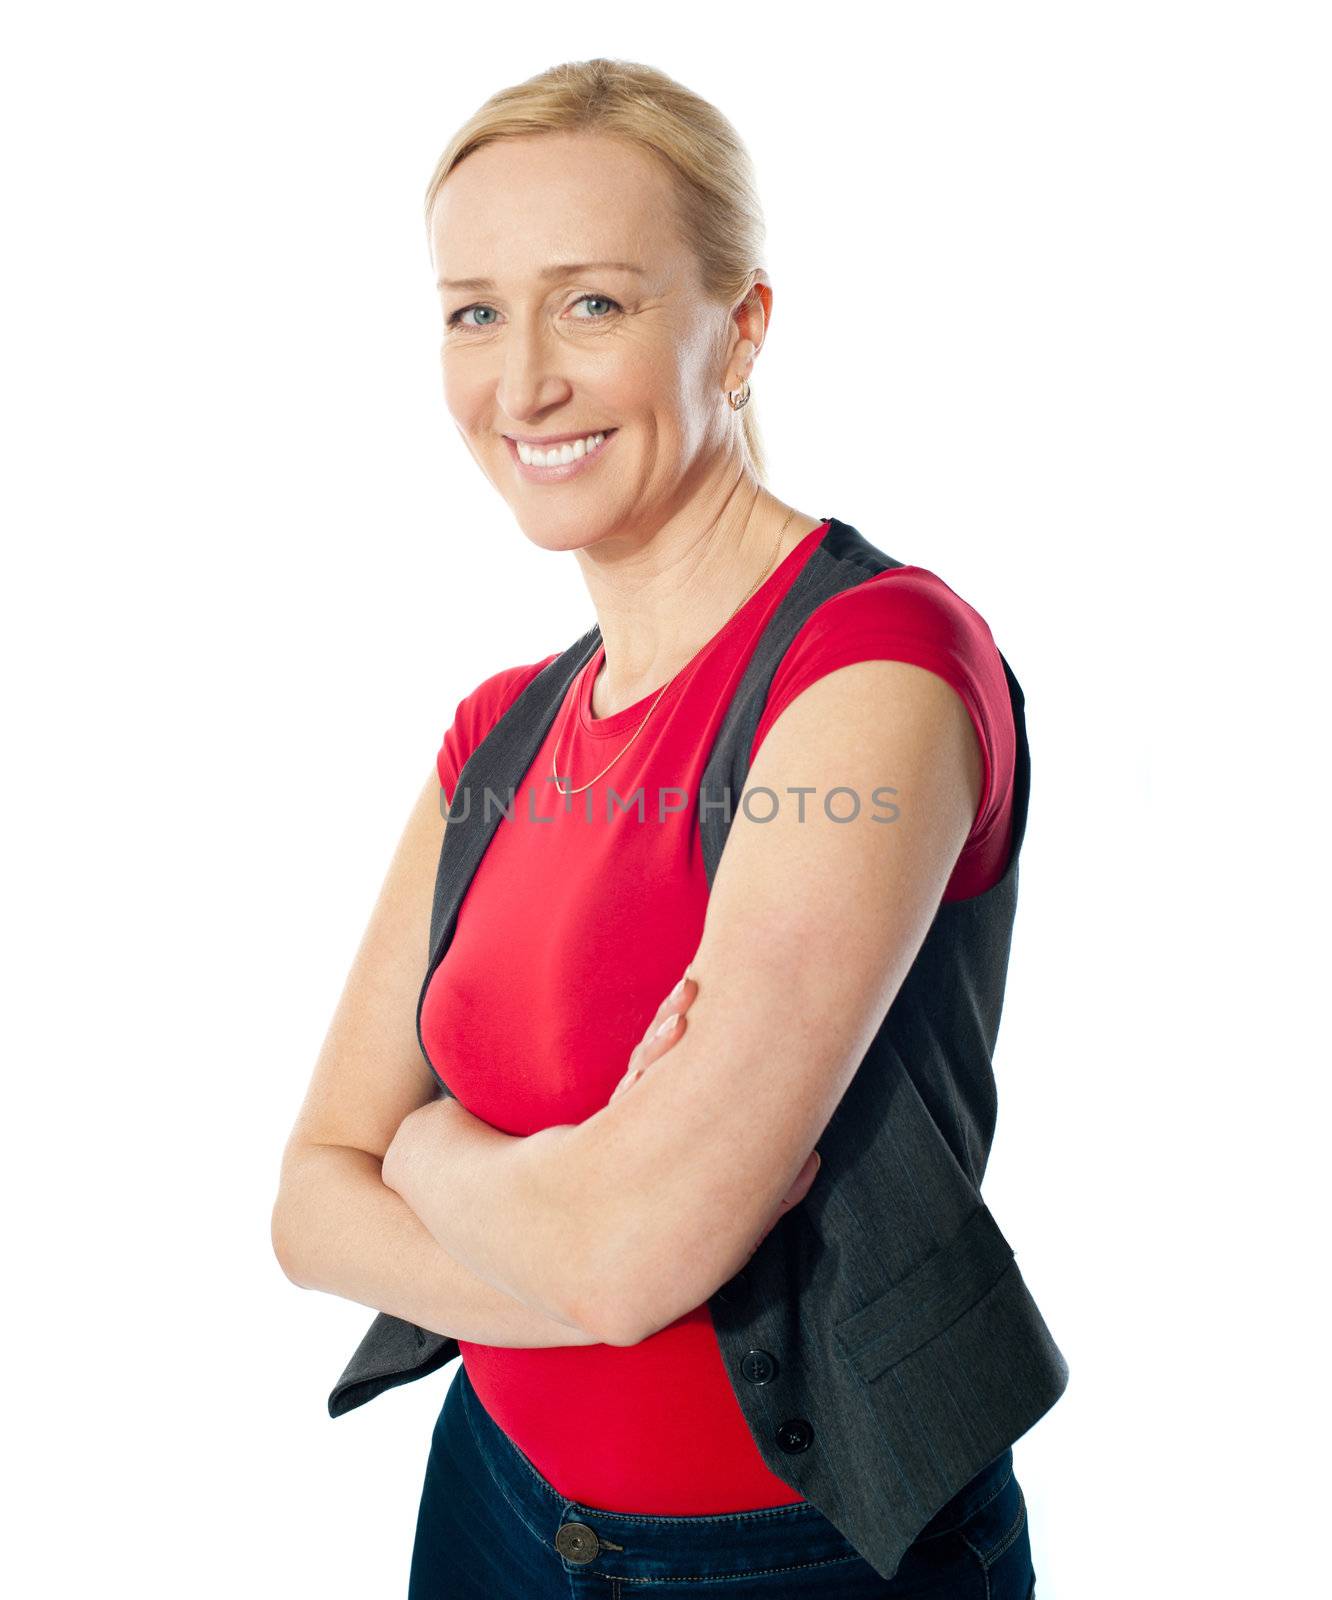 Smiling aged lady with folded arms posing on white background